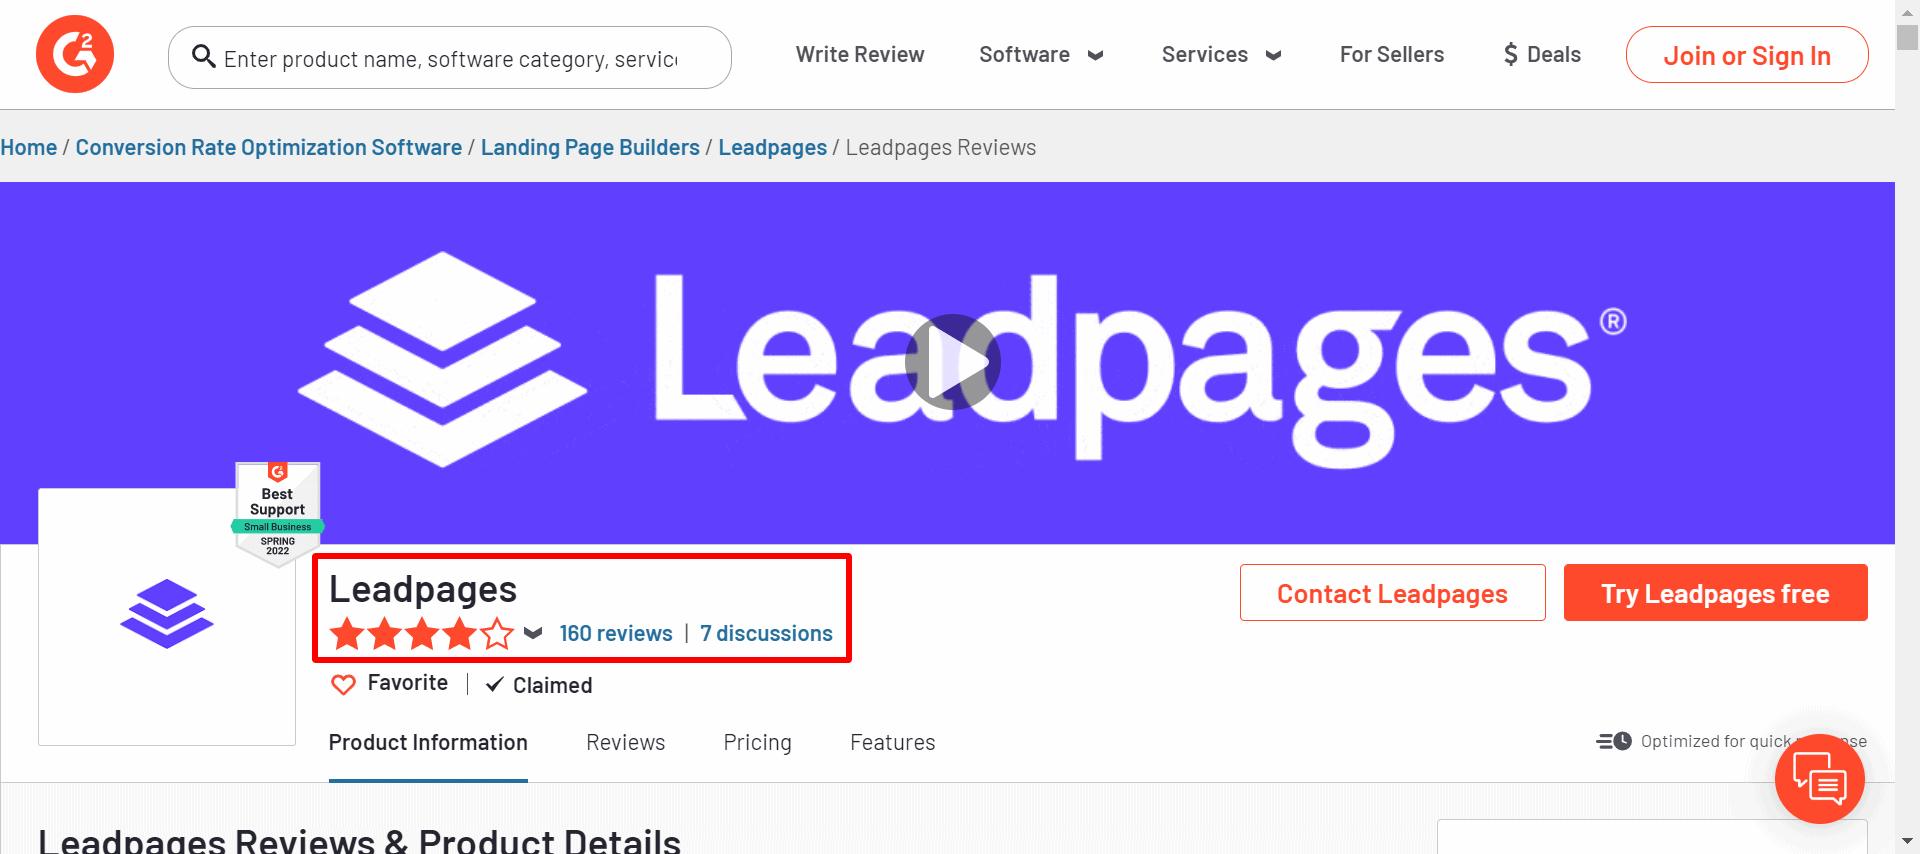 Leadpages-Reviews-G2